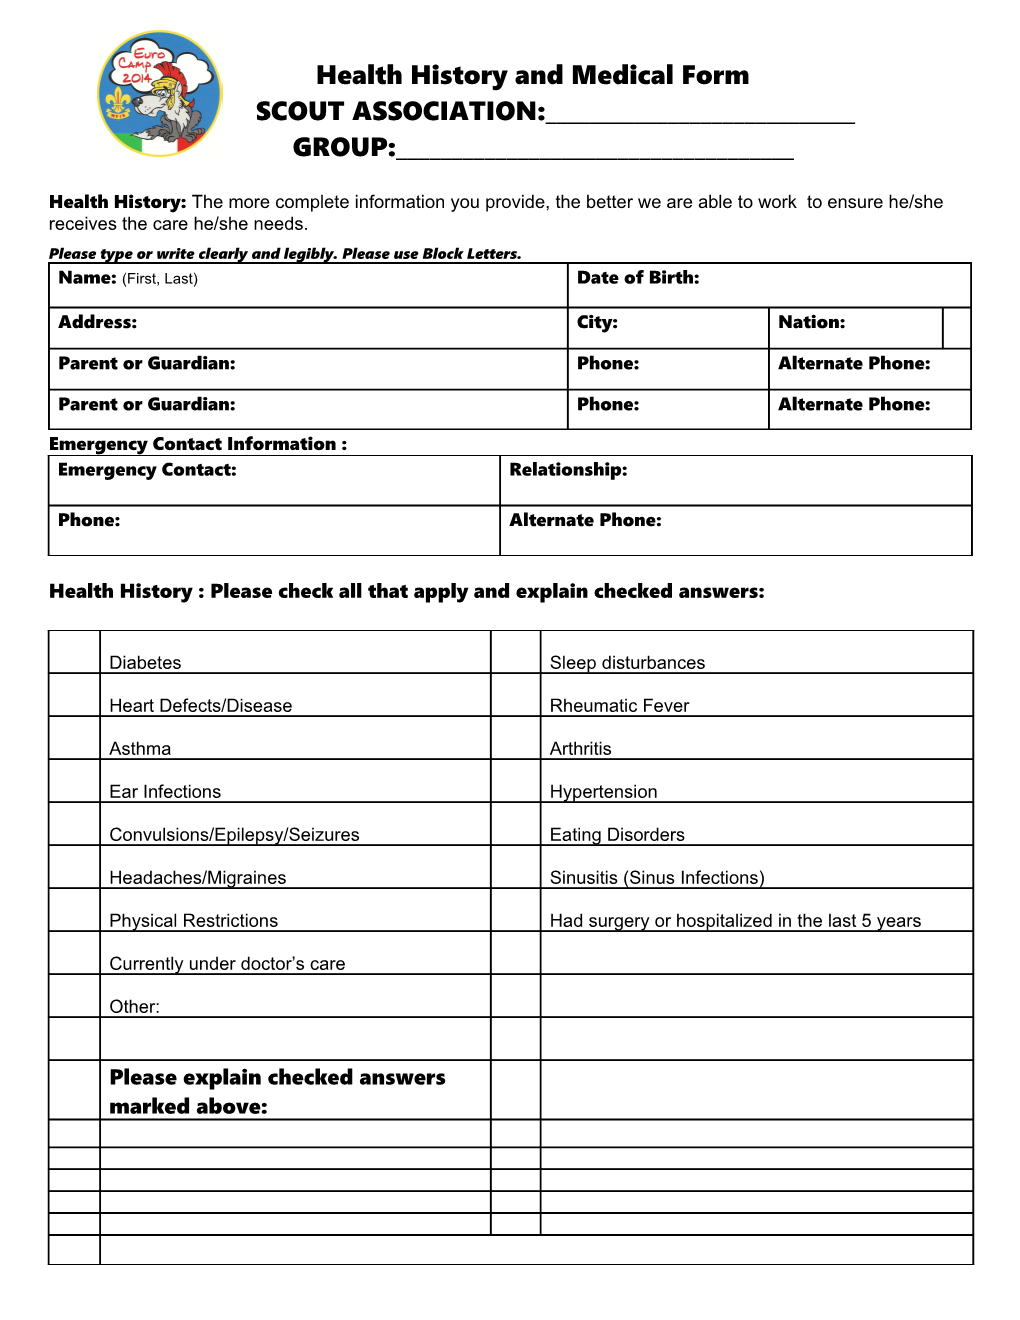 Girl Scouts Health History and Medical Examination Form for Minors